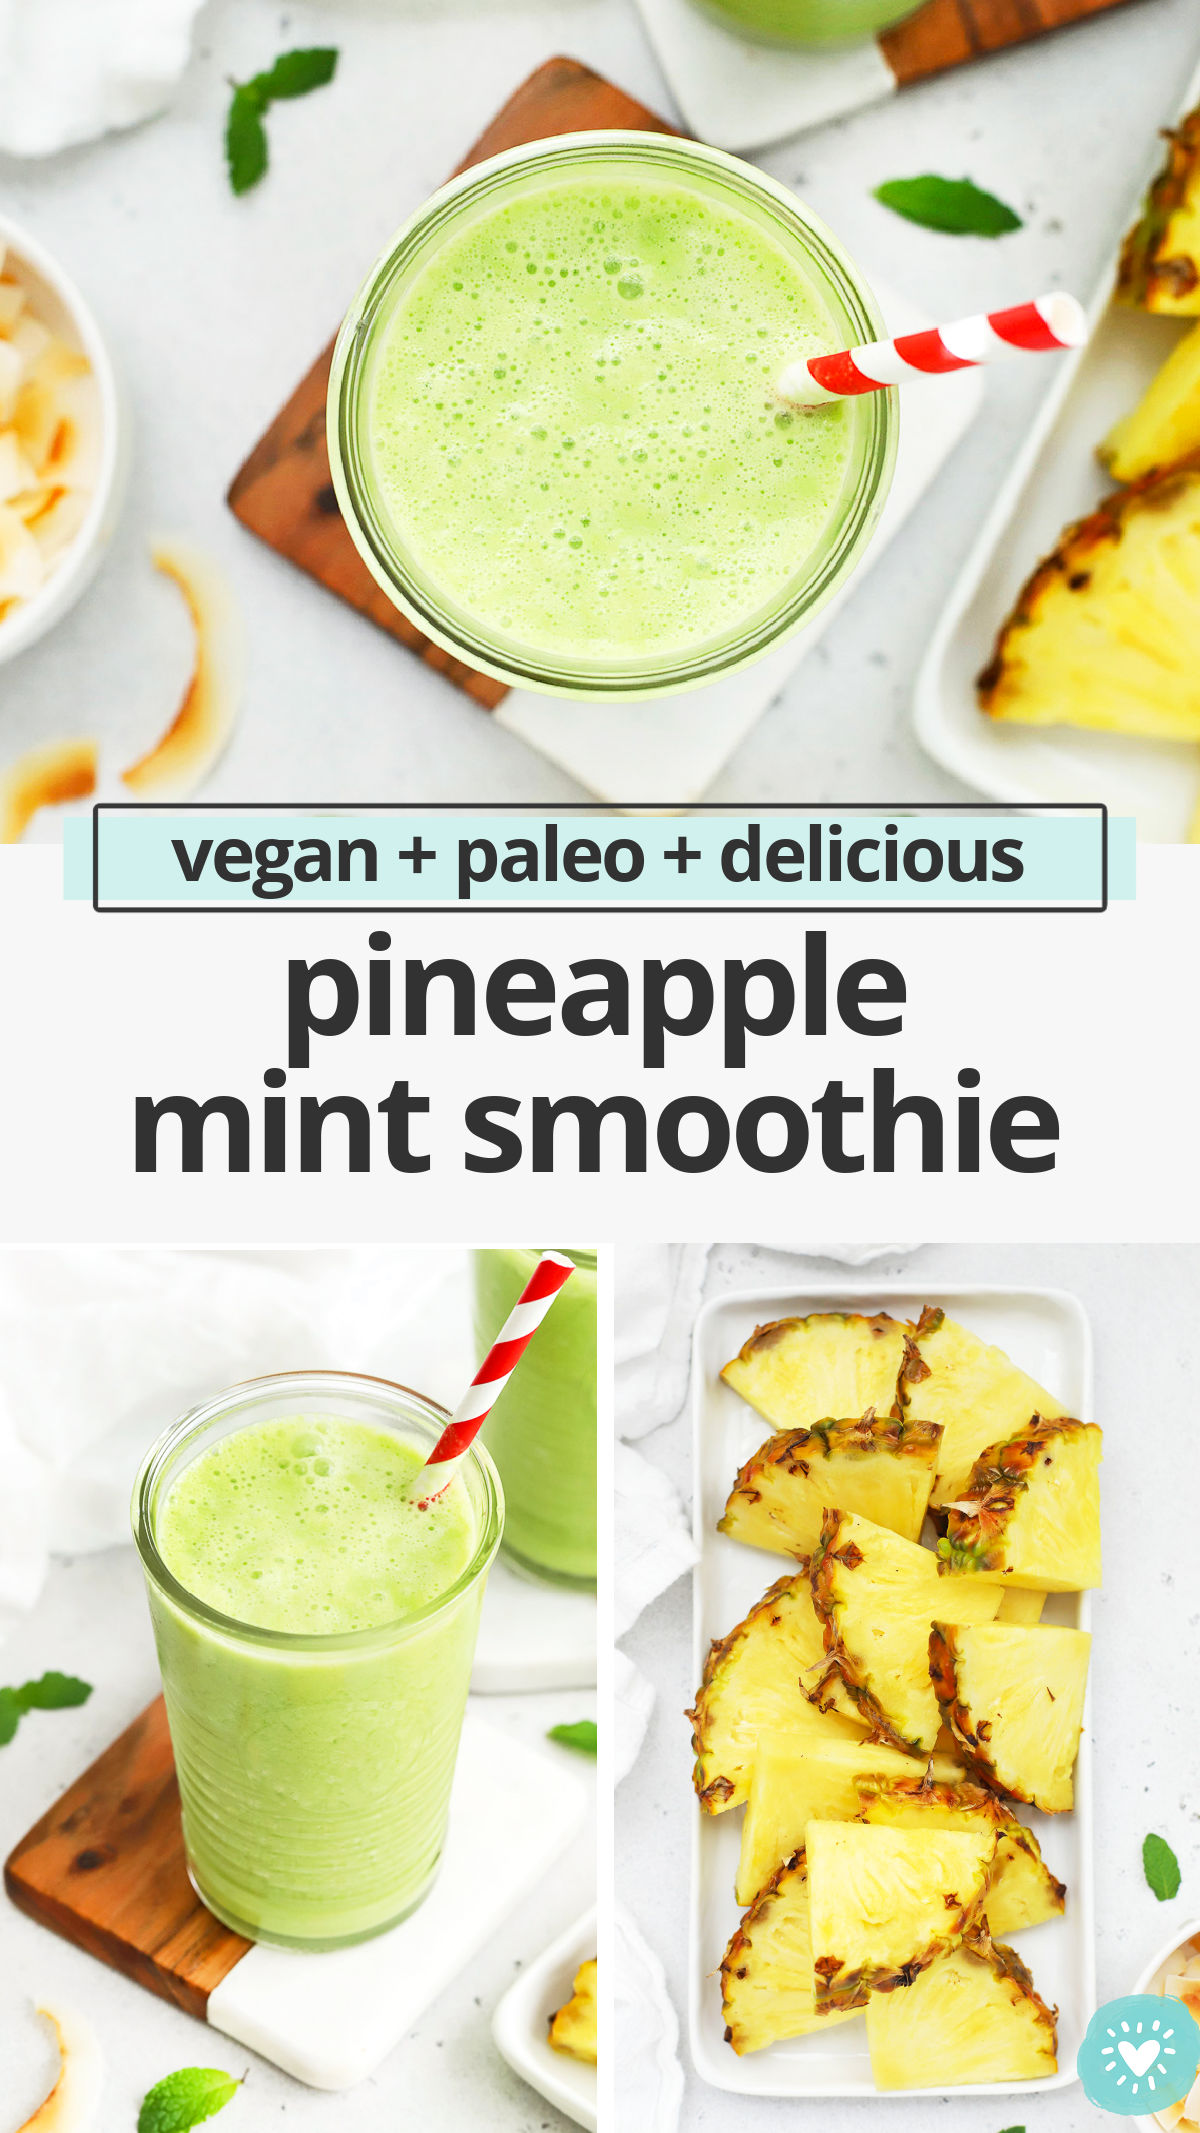 Pineapple Mint Smoothie - This light, fresh pineapple smoothie makes a beautiful healthy breakfast or snack! A perfect kid-friendly green smoothie! (Vegan, Paleo) // Vegan pineapple smoothie // paleo pineapple smoothie // kid friendly green smoothie // green smoothie #smoothie #greensmoothie #vegan #healthybreakfast #healthysnack #paleo